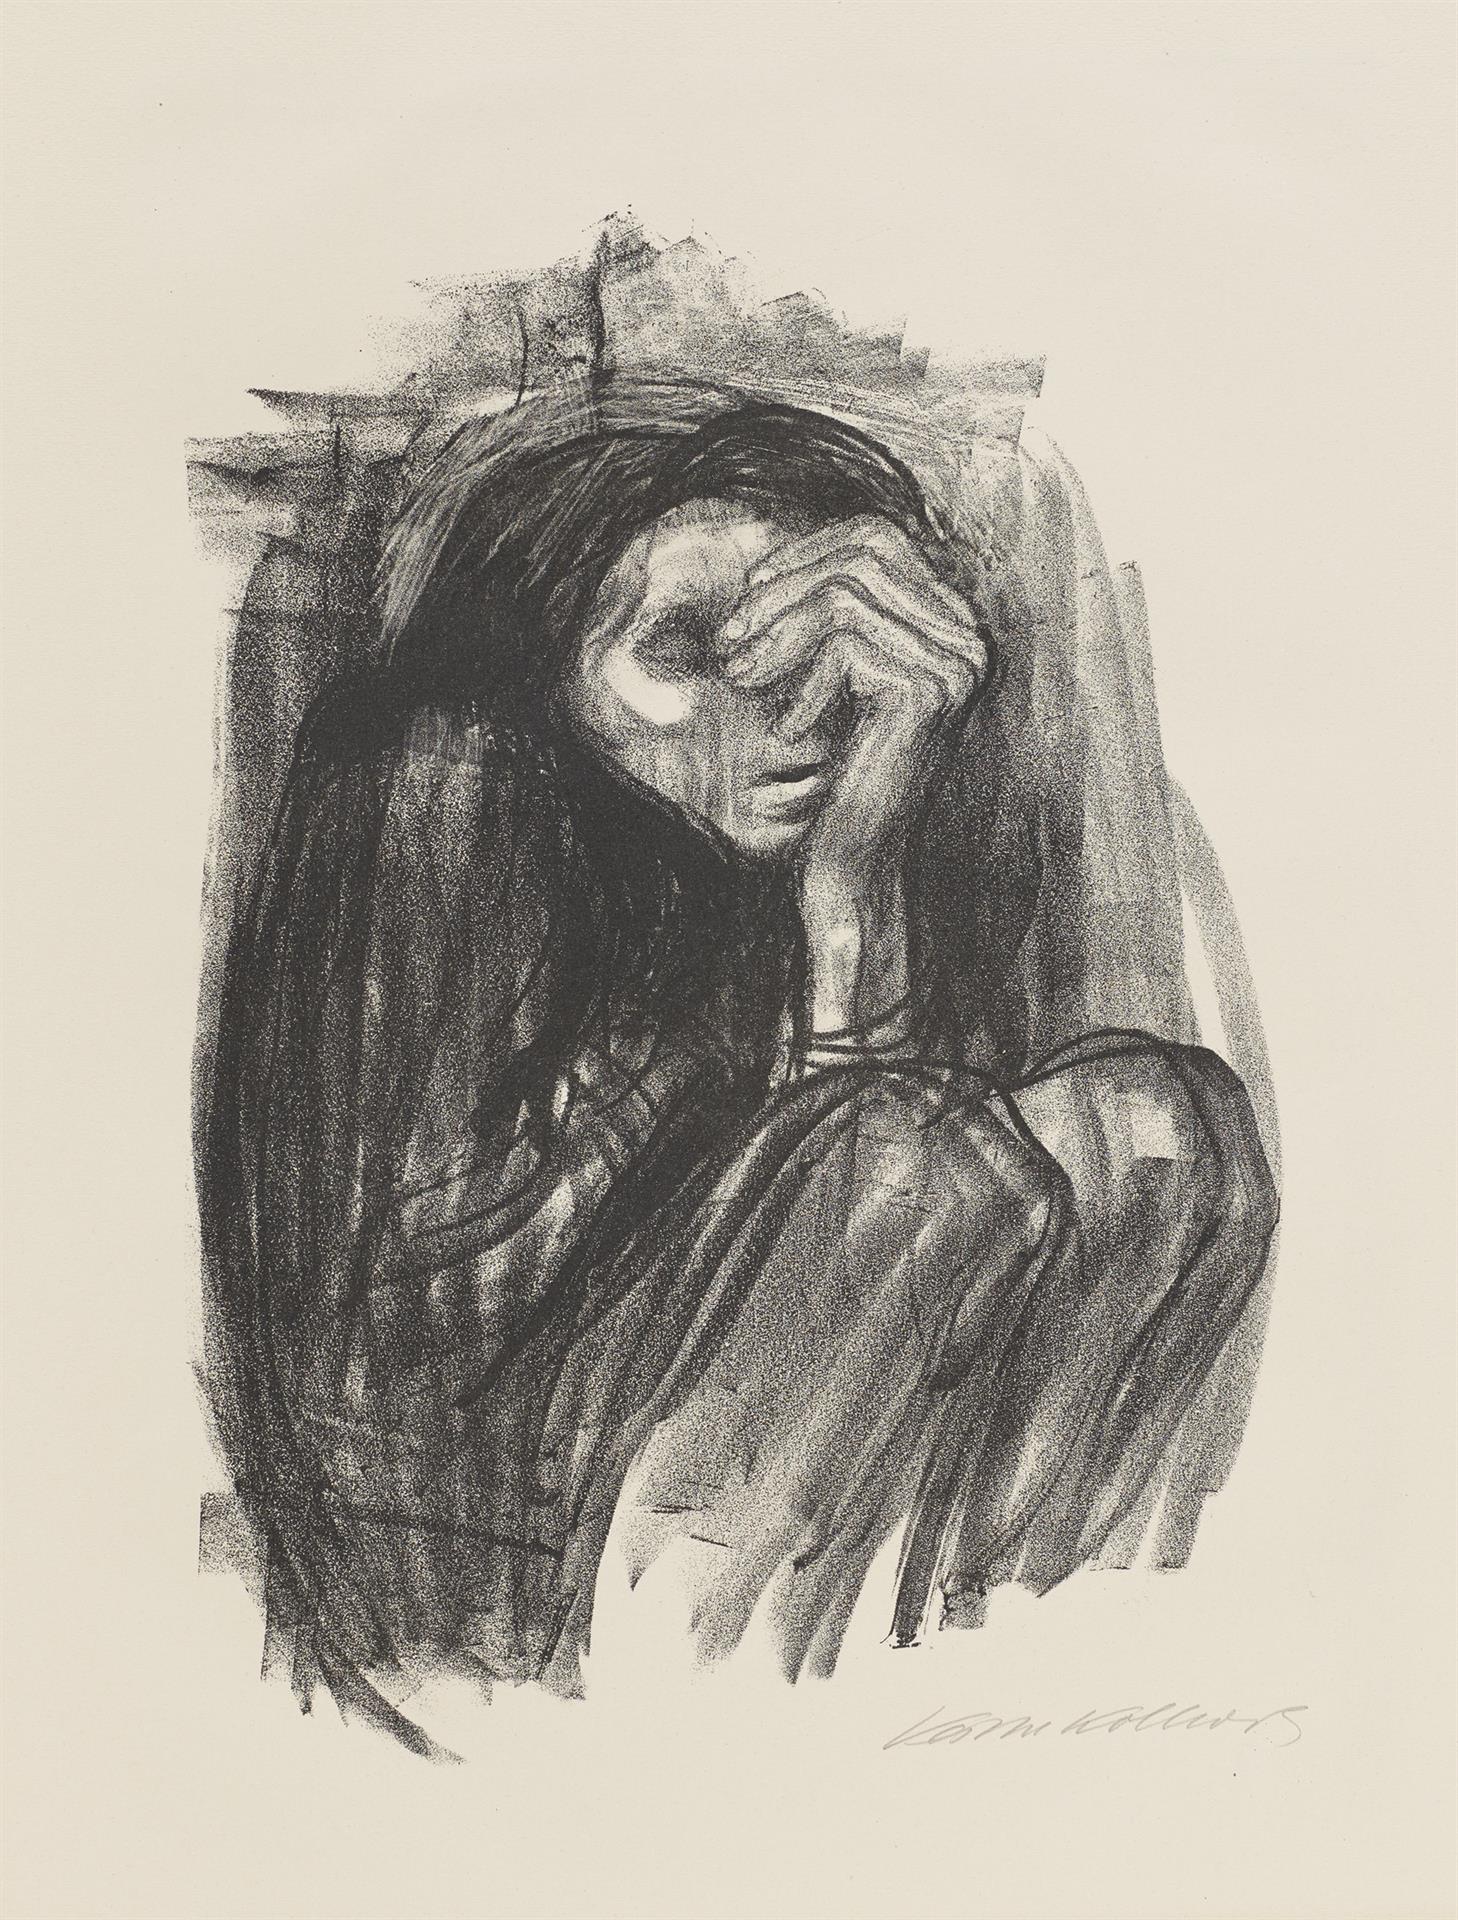 Käthe Kollwitz, Death on the Road, sheet 5 of the series »Death«, 1937, crayon lithograph, Kn 270 II b, Cologne Kollwitz Collection © Käthe Kollwitz Museum Köln